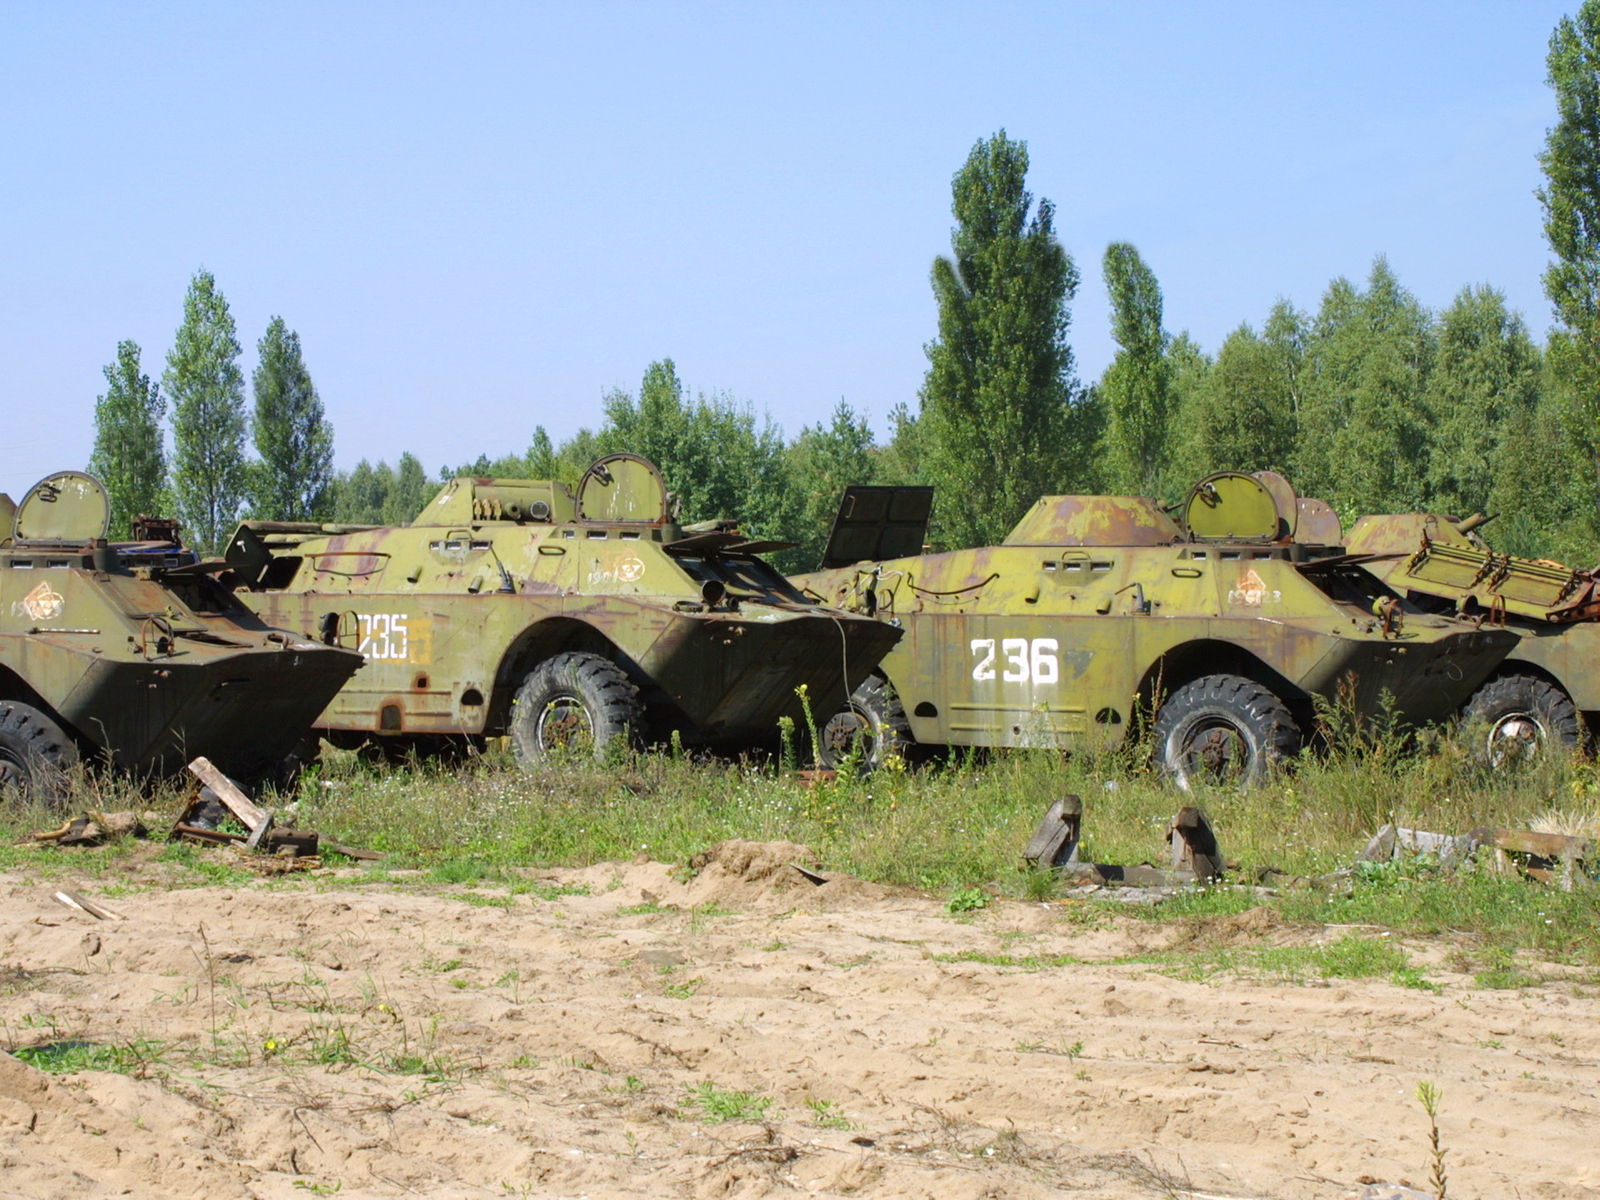 Tanks or armored troop carriers pictured in the exclusion zone to help answer is Chernobyl safe to visit